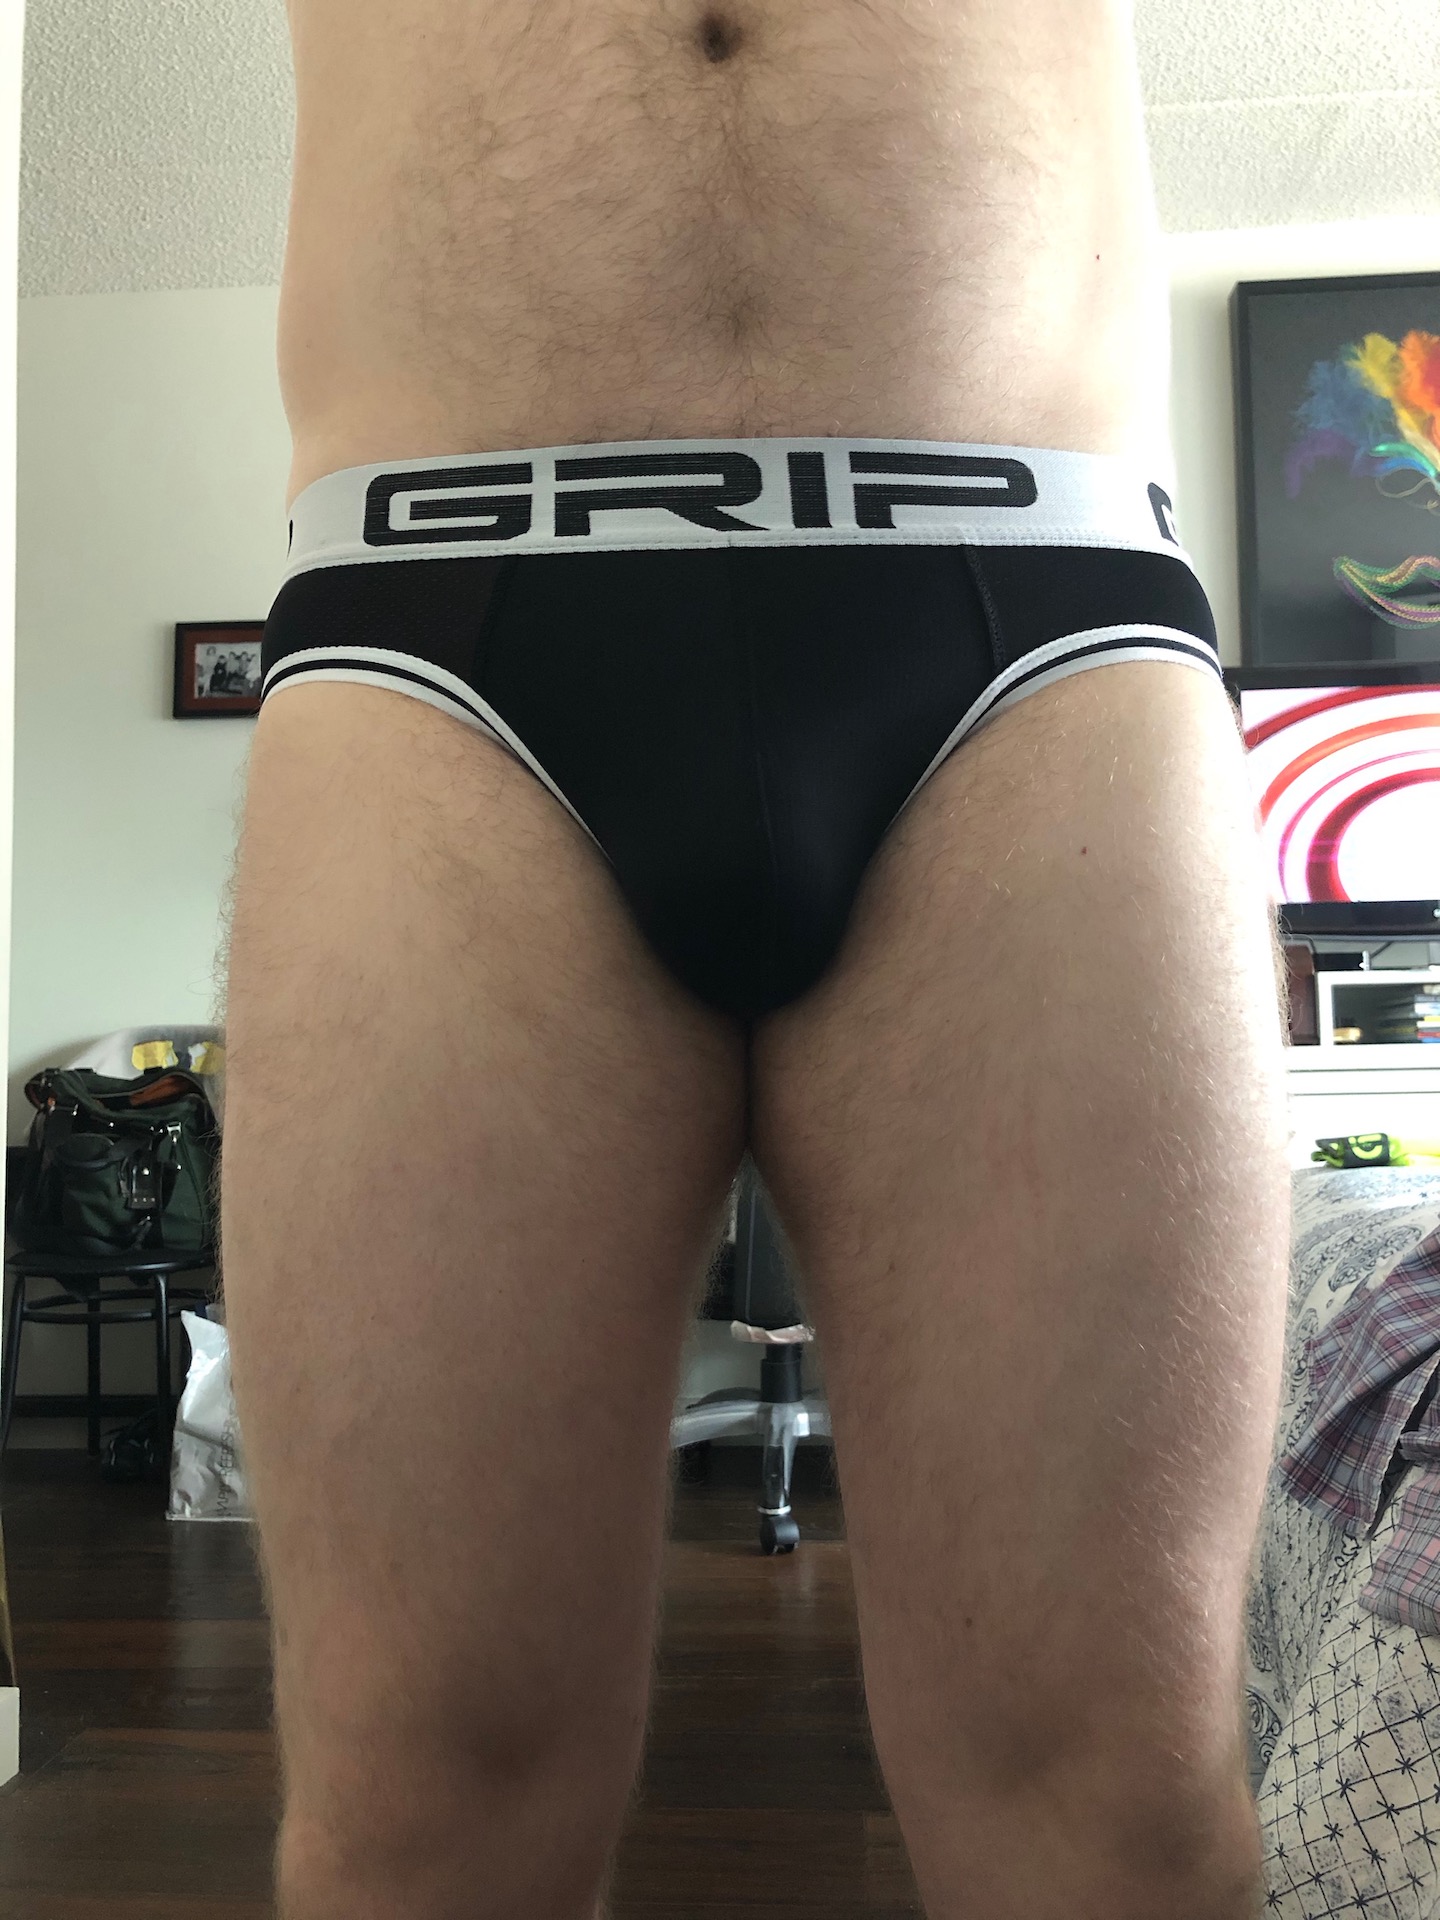 Get a grip…on me or my briefs…